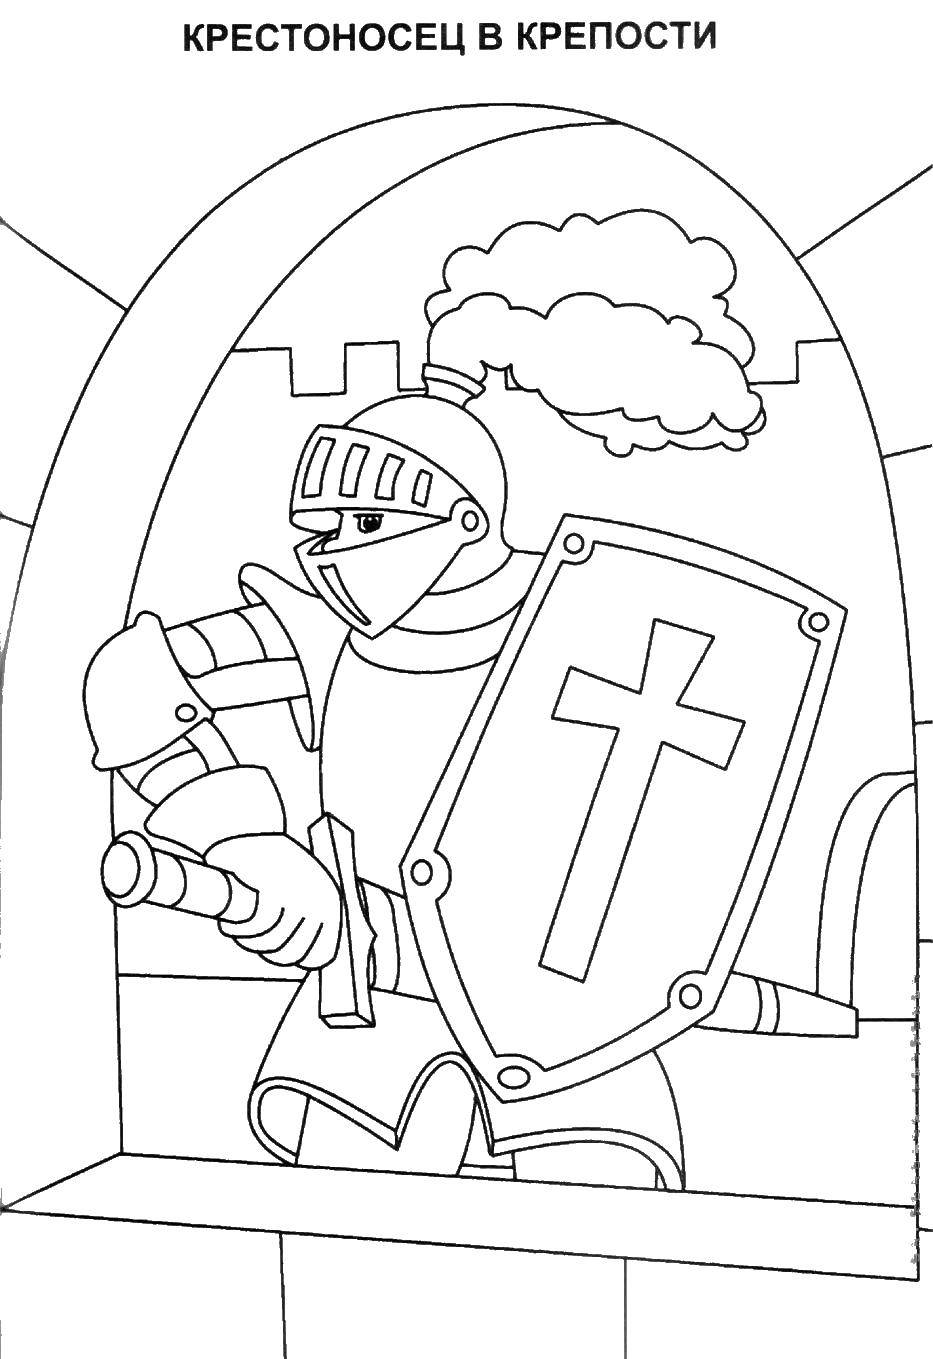 Coloring Crusader the fortress. Category the crusaders. Tags:  Warrior , knight.